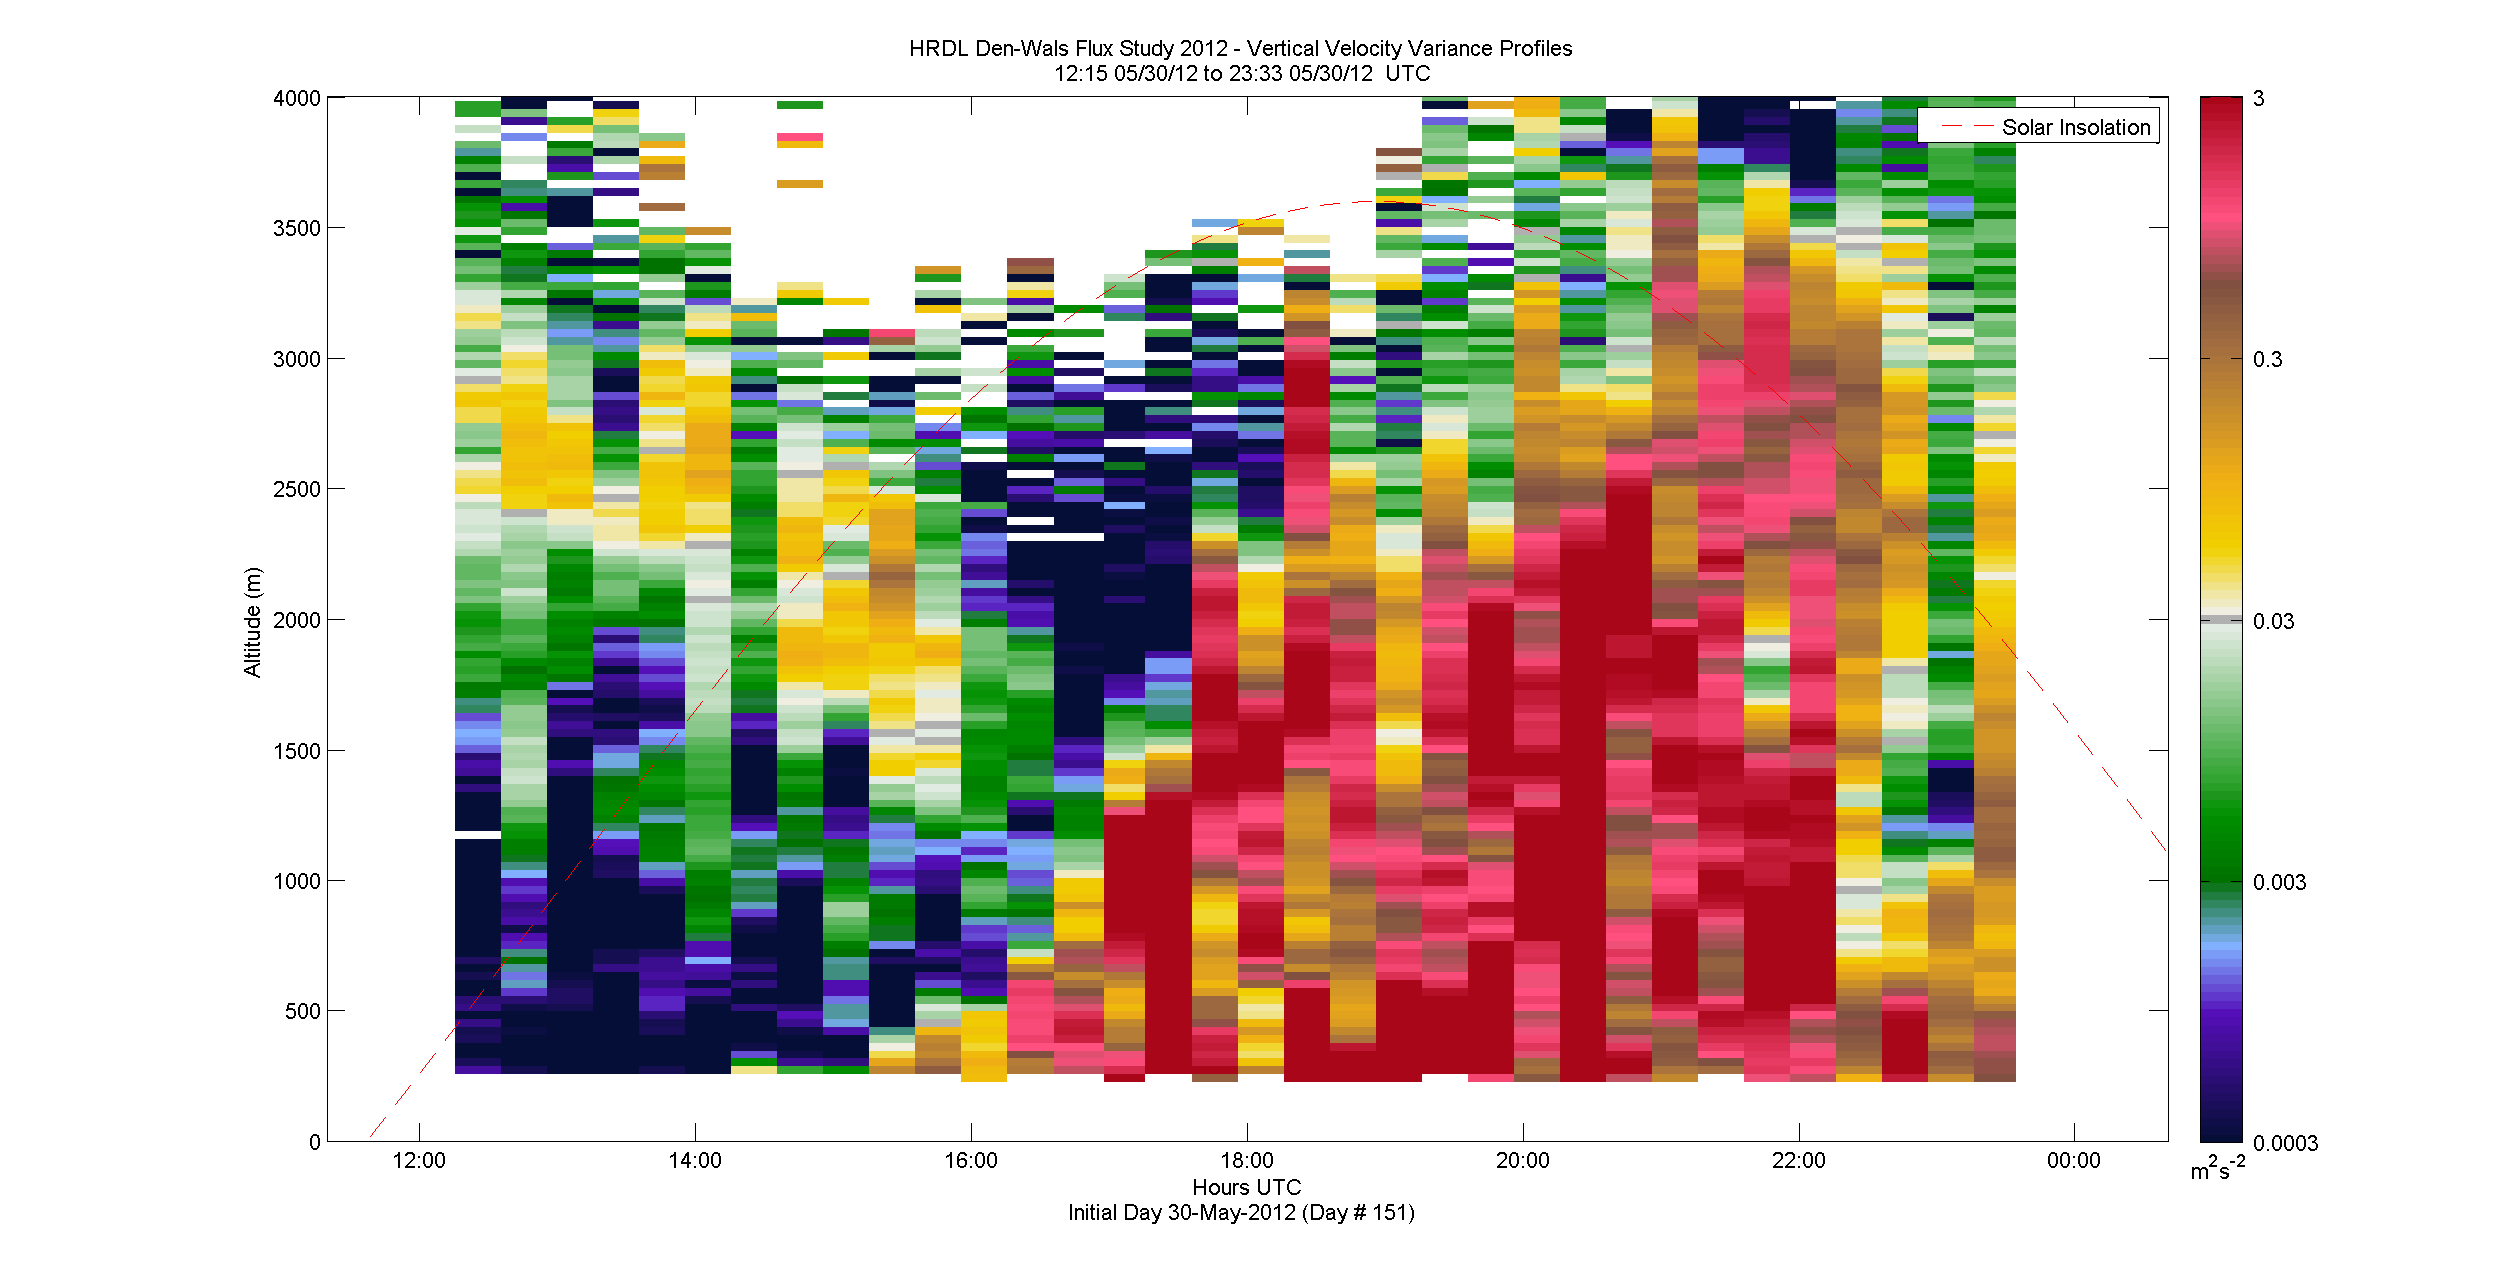 HRDL vertical variance profile - May 30 pm